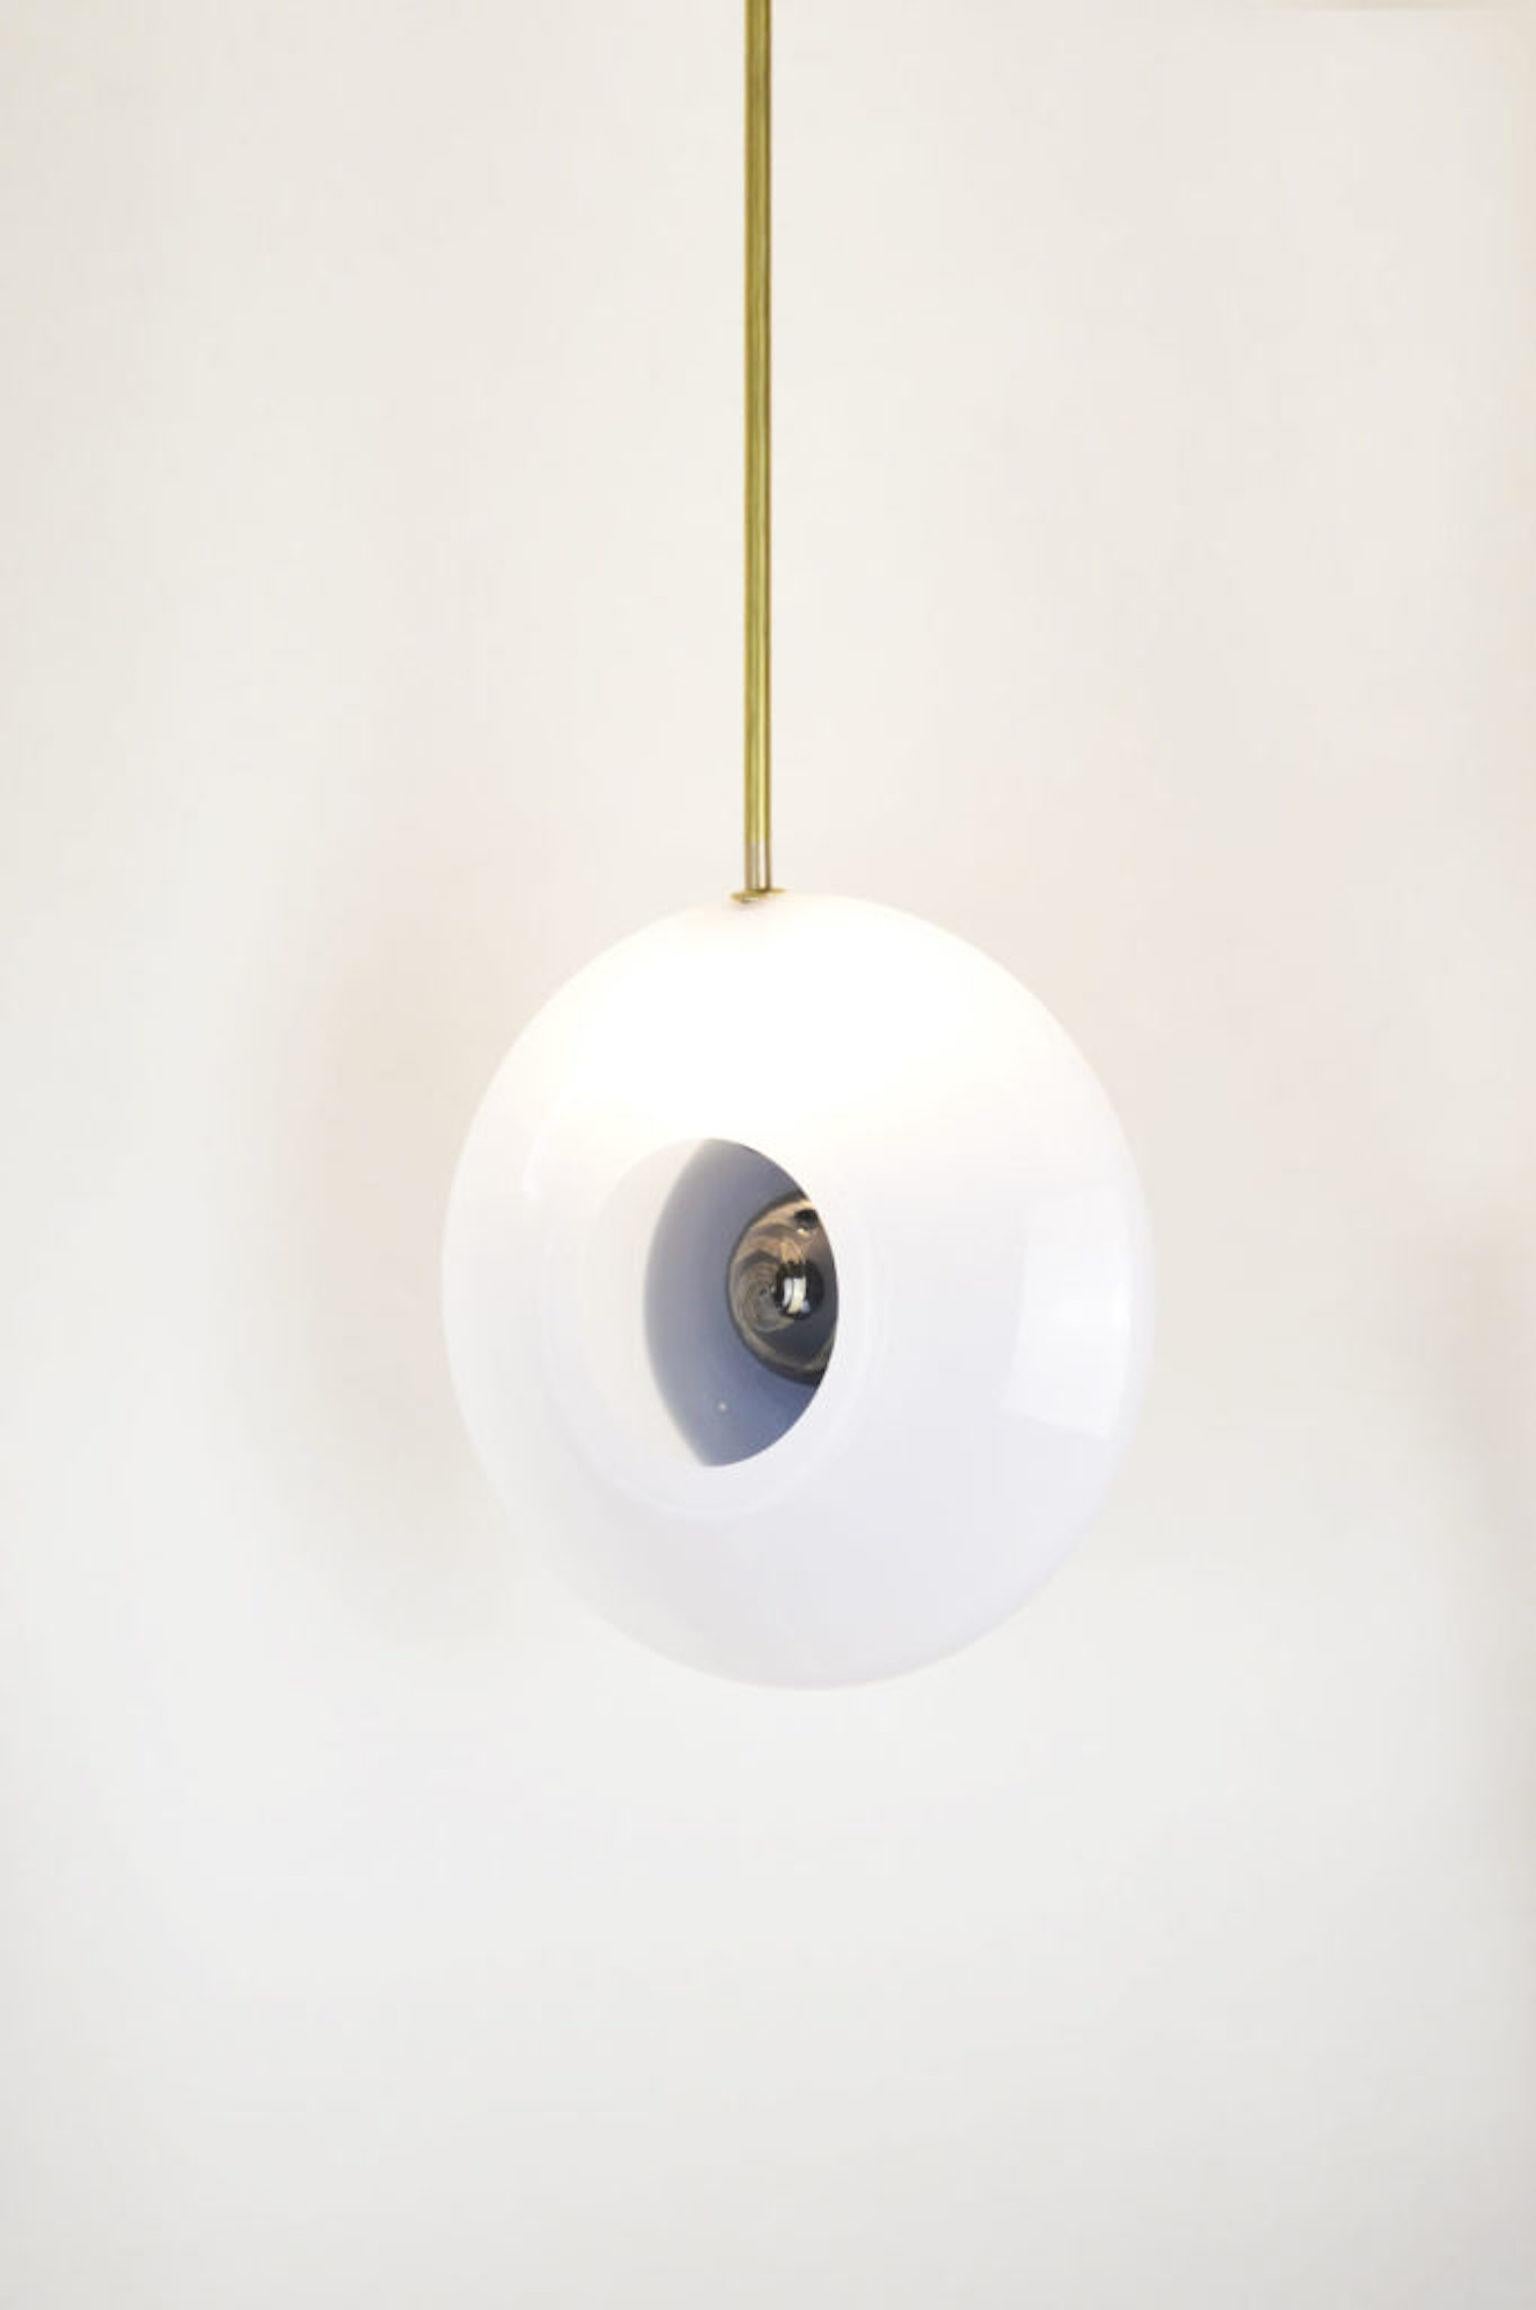 Pendant light conceptualized by Atelier George in 2020, and it corresponds to the Aube Collection.
This lighting piece is made of blown glass with two fundamental elements, the white ellipse shape from the outside, and a black heart shape from the